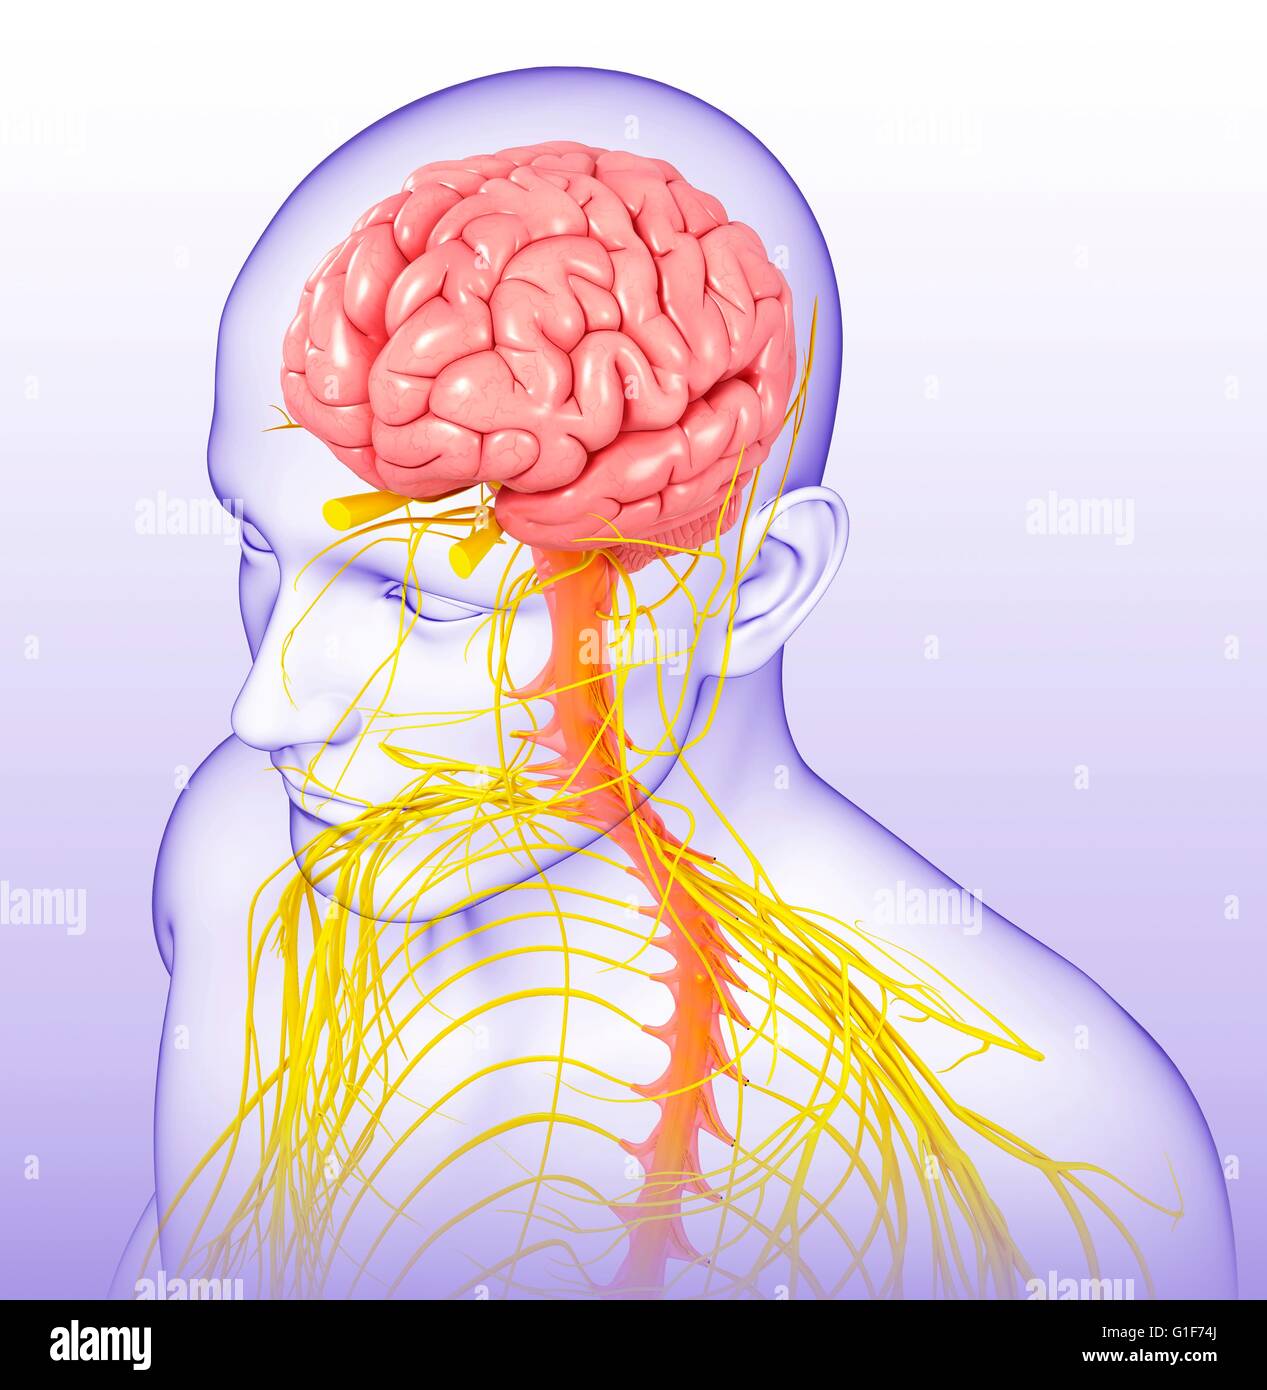 Human brain and spinal cord, illustration Stock Photo - Alamy